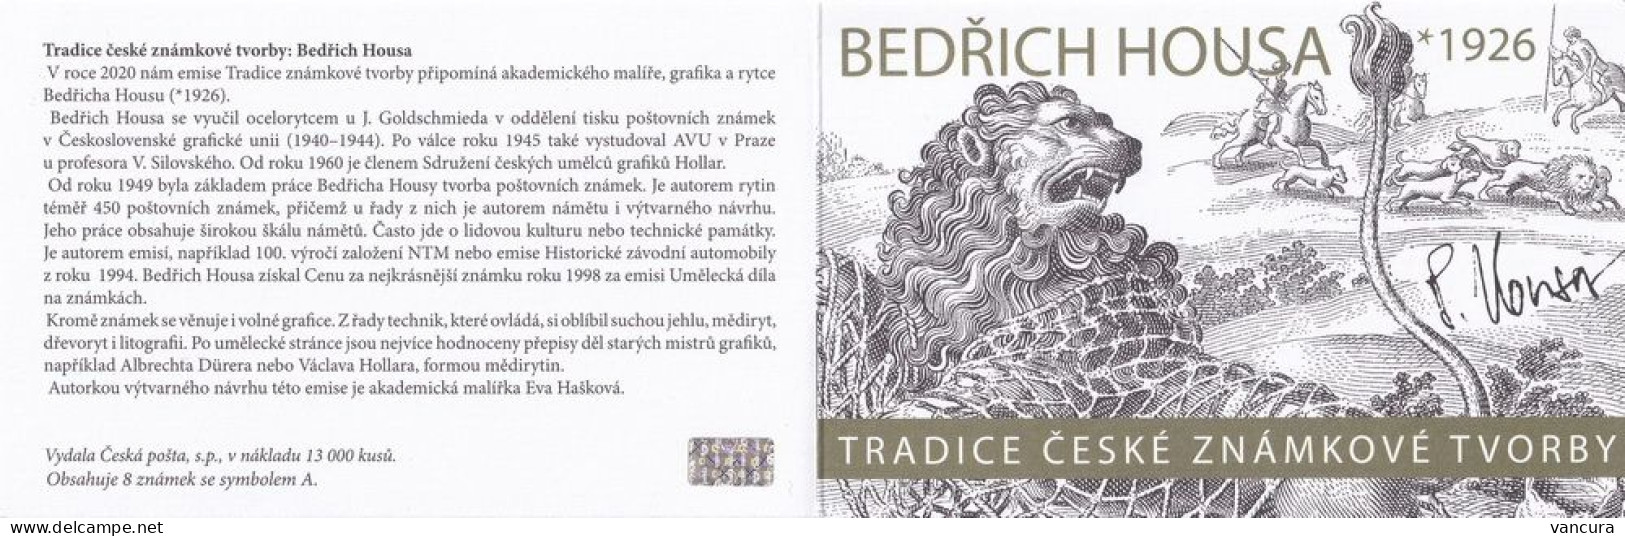 Booklet 1056 Czech Republic Traditions Of The Stamp Design - Bedrich Housa, Engraver 2020 - Engravings